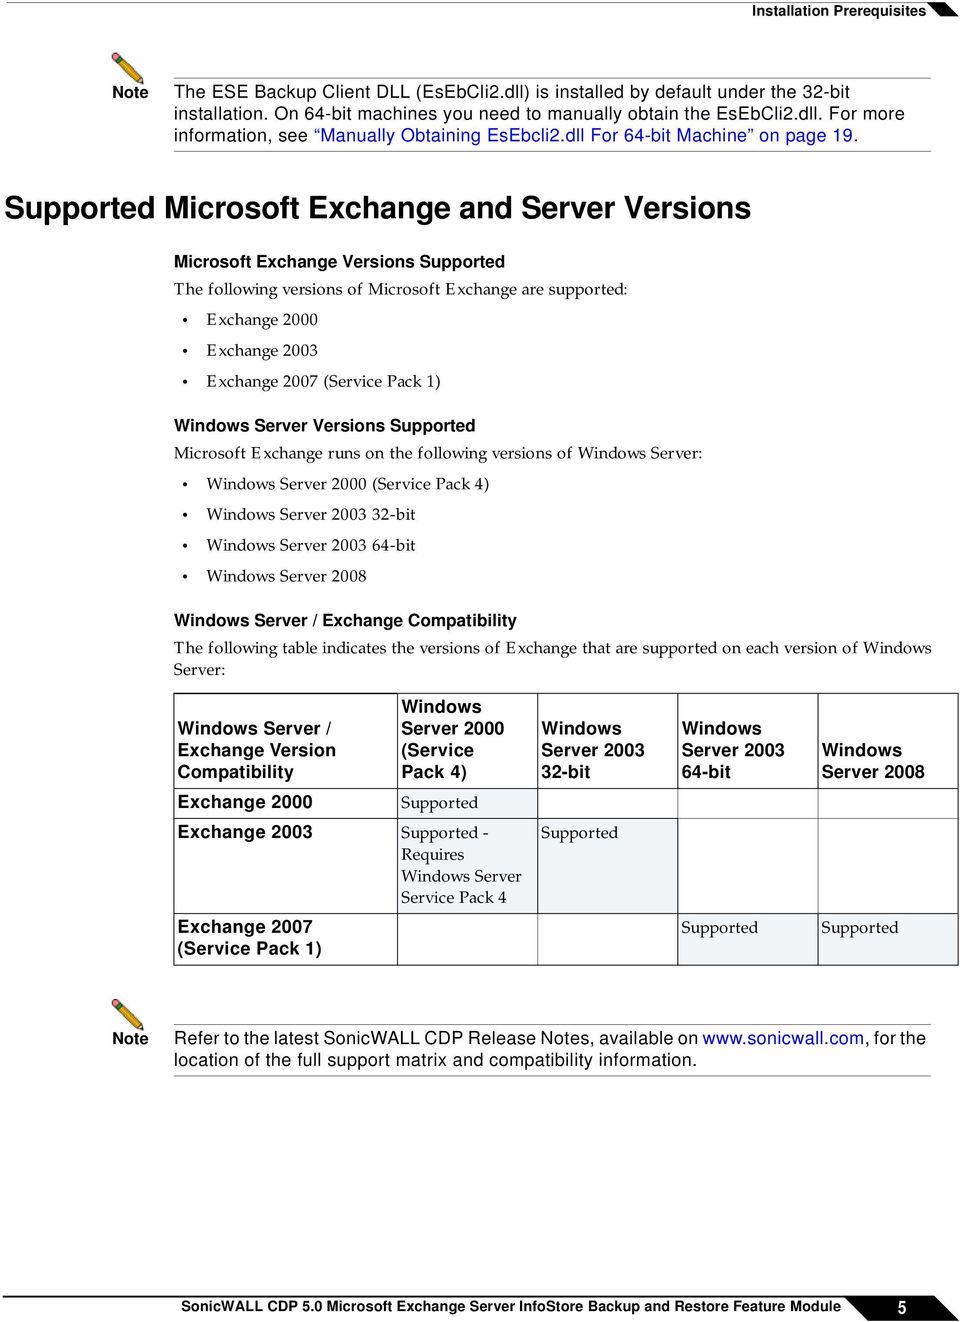 Supported Microsoft Exchange and Server Versions Microsoft Exchange Versions Supported The following versions of Microsoft Exchange are supported: Exchange 2000 Exchange 2003 Exchange 2007 (Service